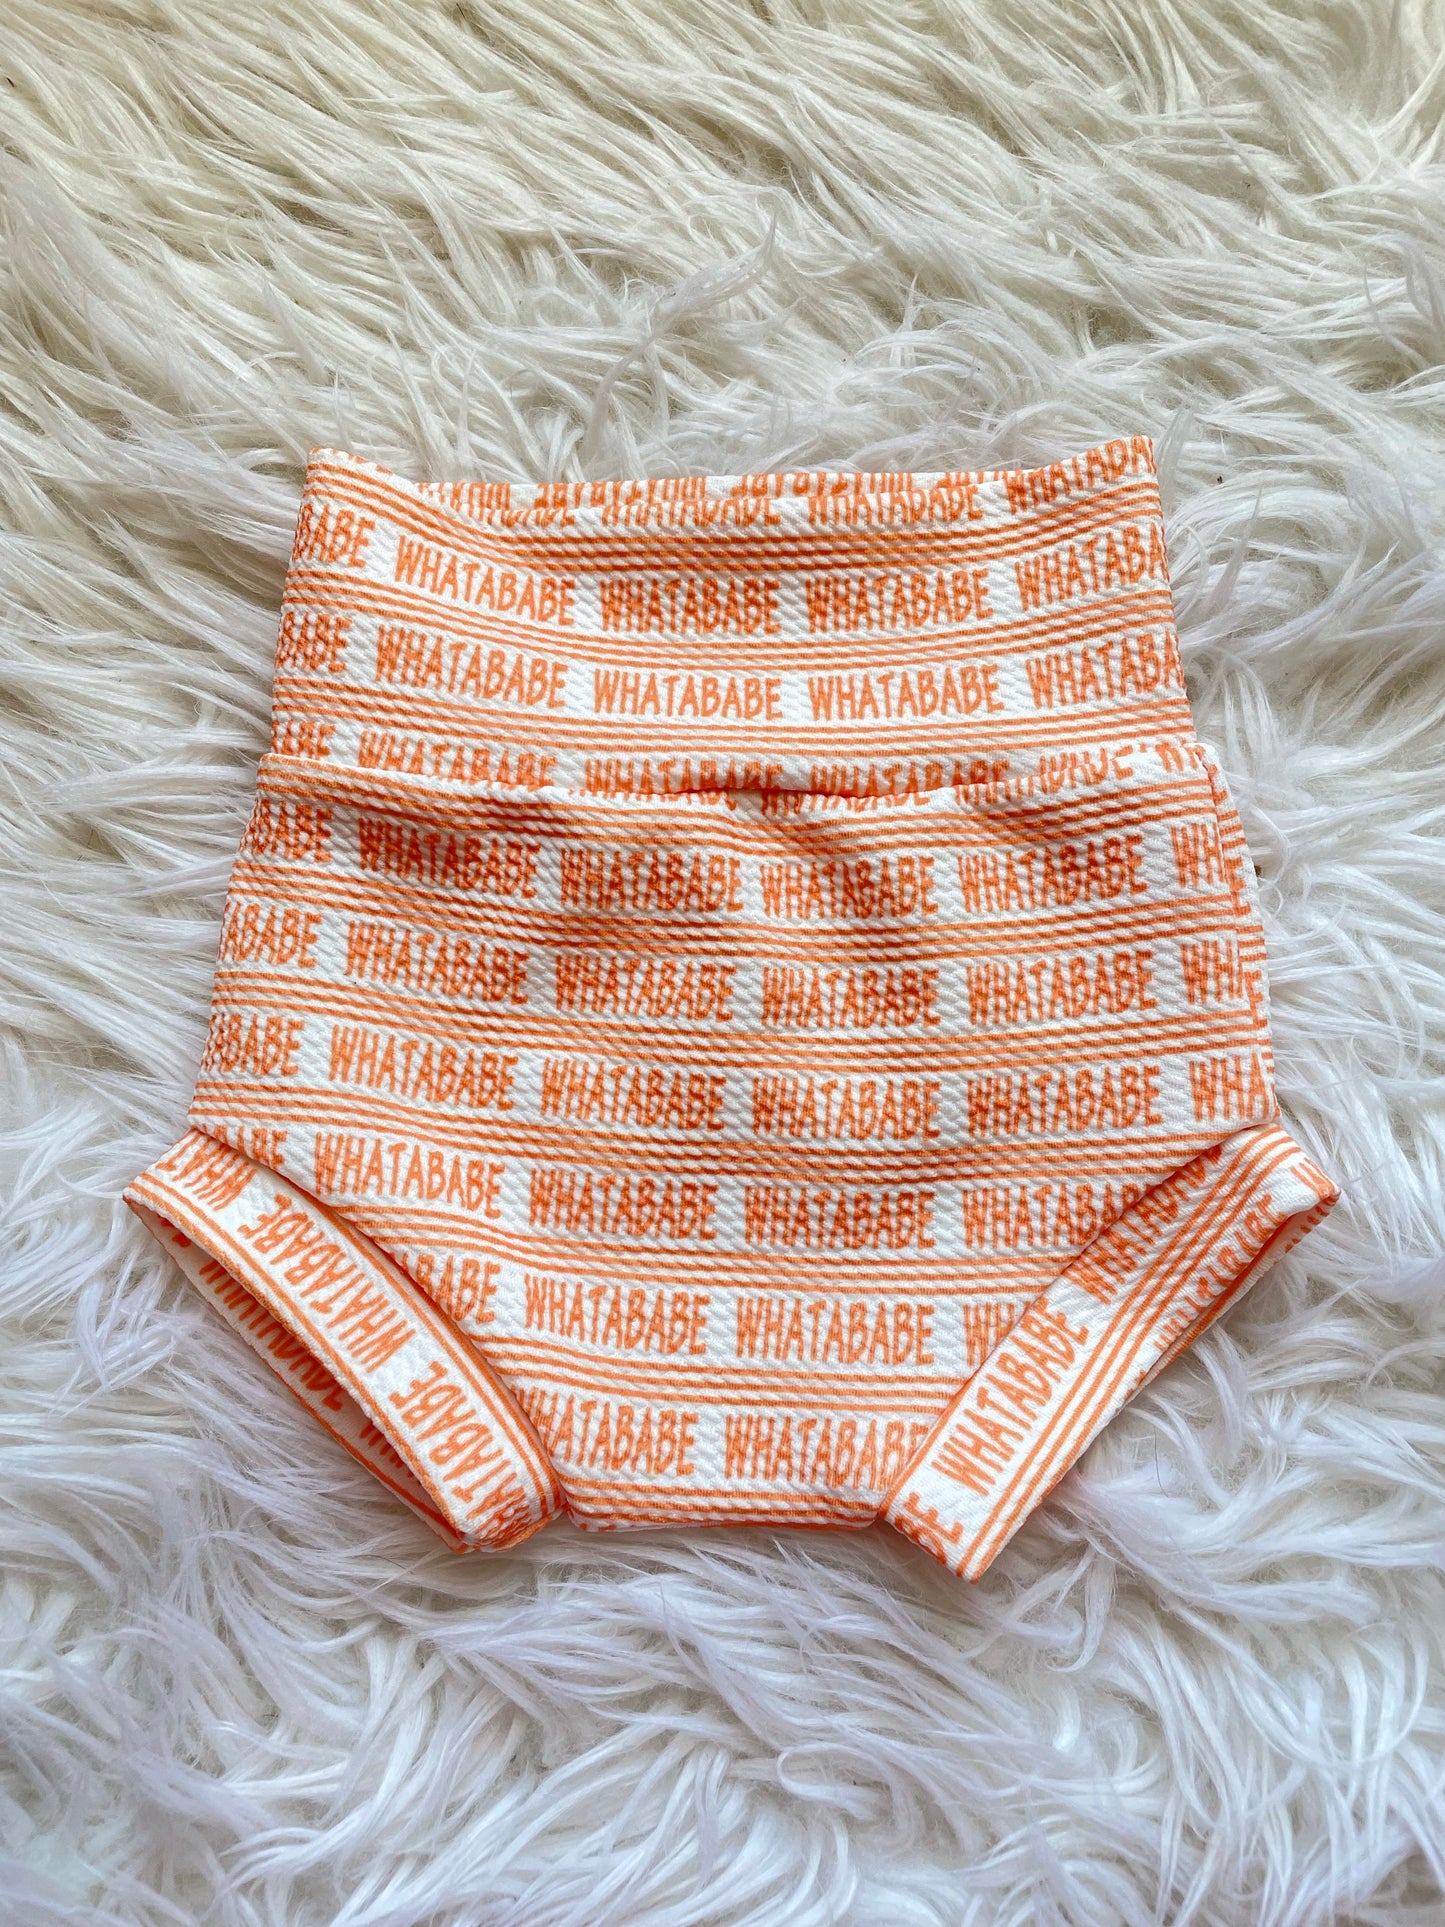 SAMPLE - Whatababe-Baby Bae Boutique